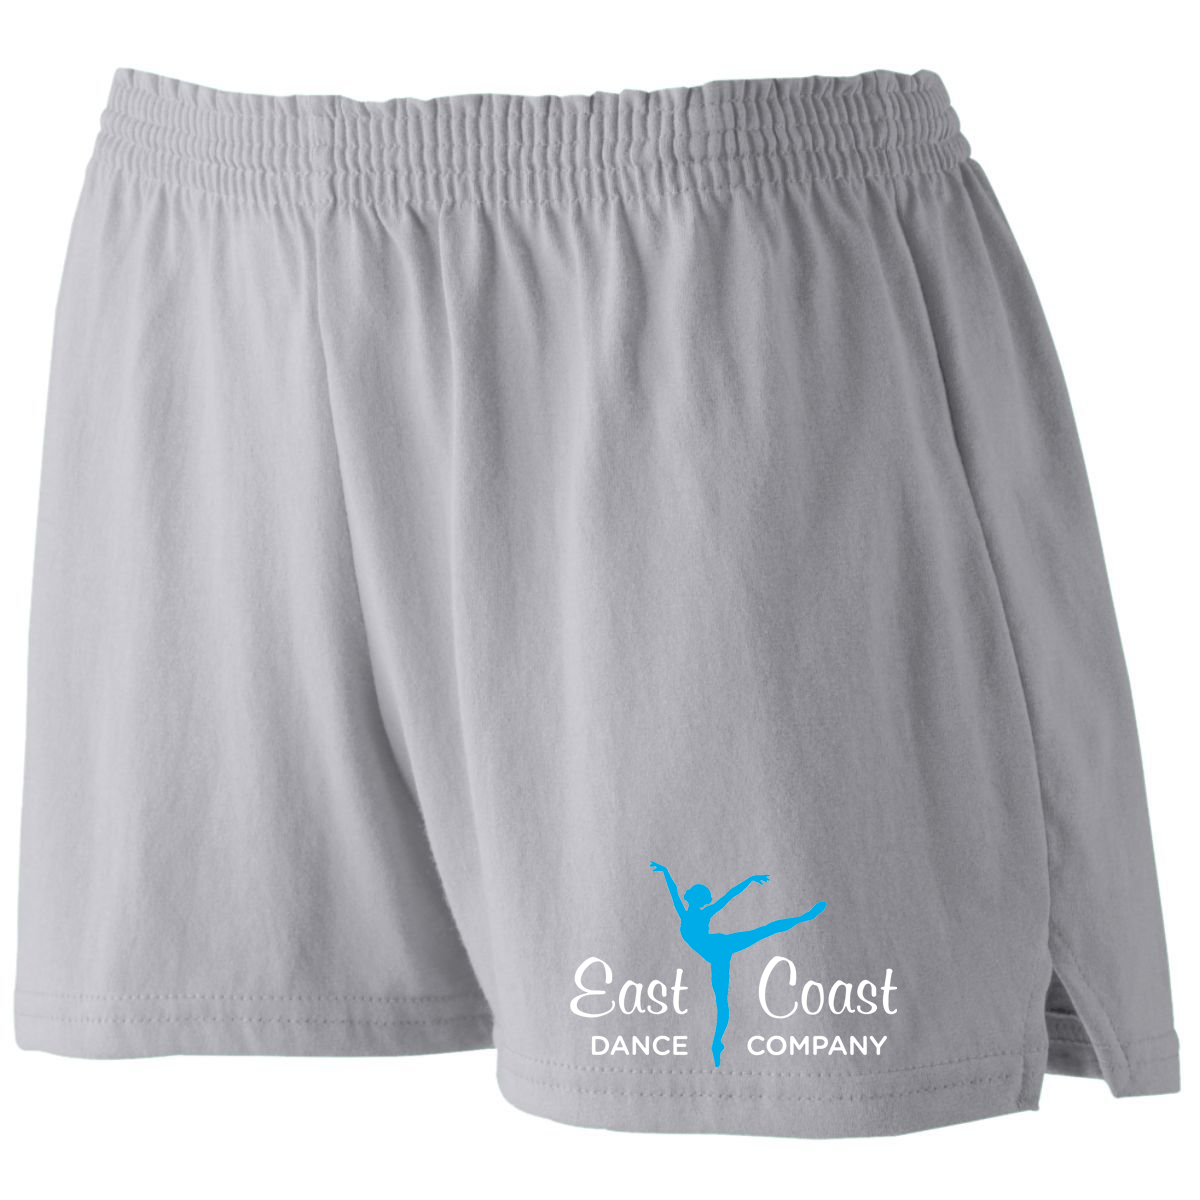 East Coast Dance Company Women's Jersey Shorts - YOUTH SIZES AVAILABLE *NEW*